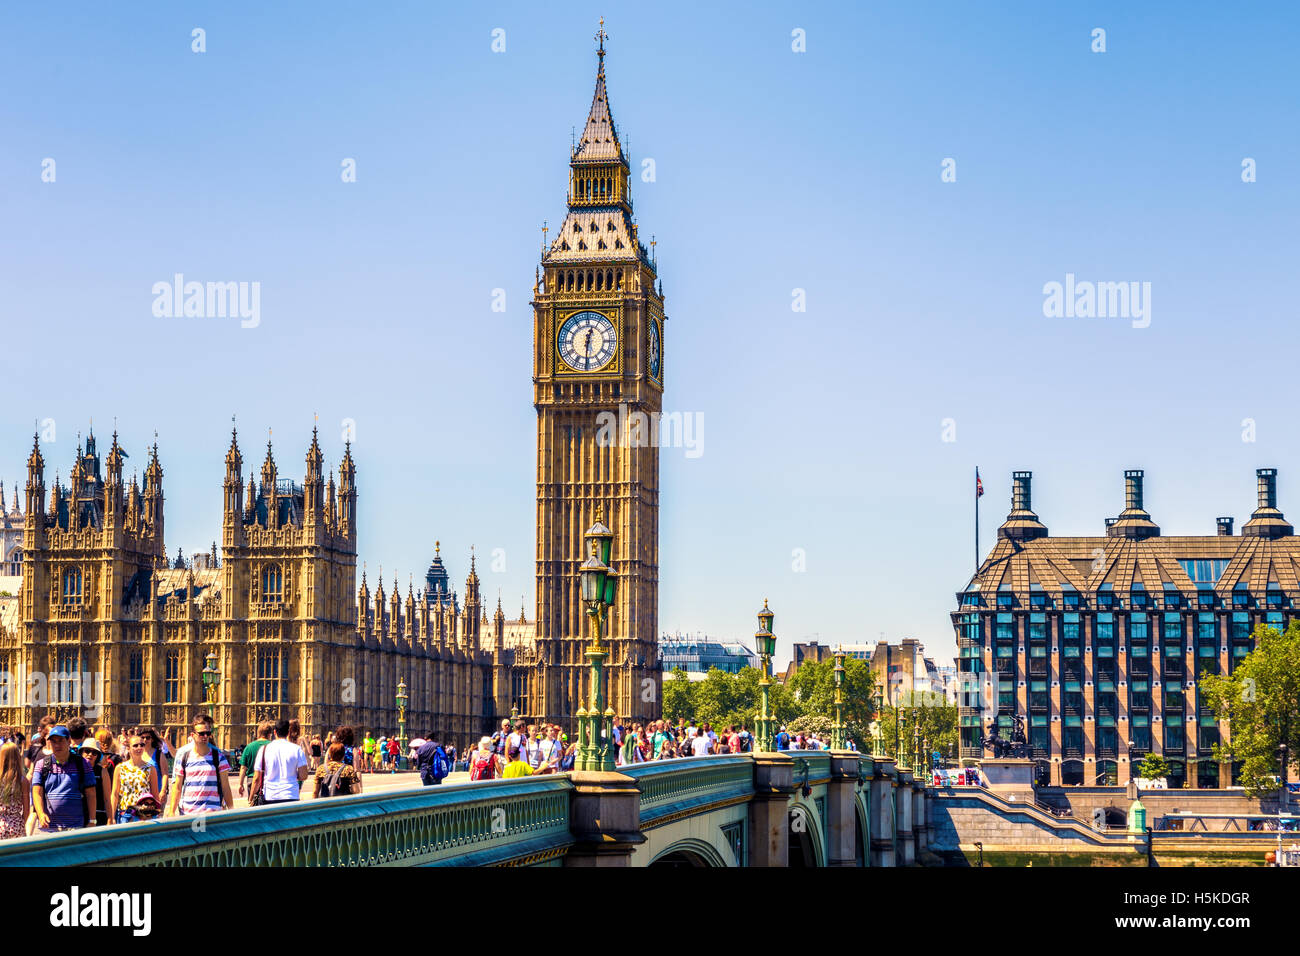 London, UK - July 19, 2016 - Big Ben and House of Parliament in London with a crowd of tourists on a cloudless day Stock Photo